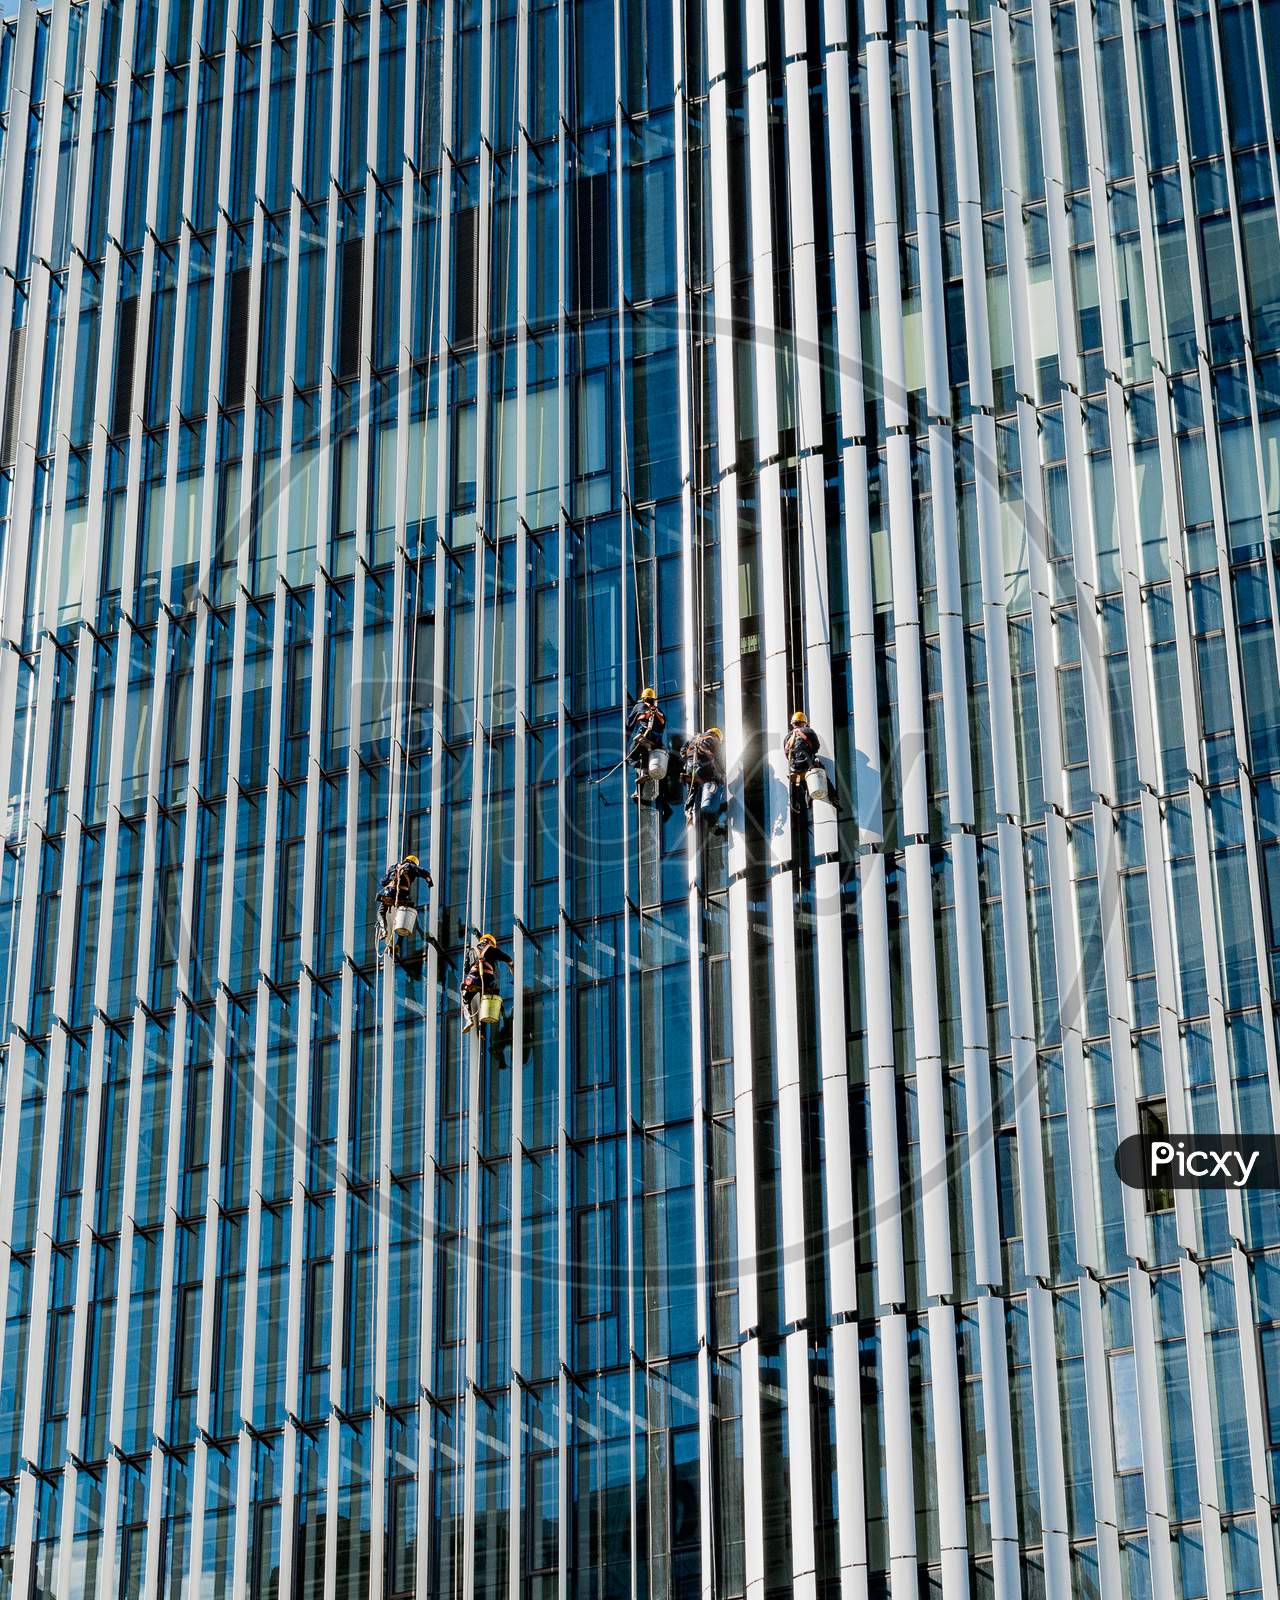 Workers Cleaning Windows Of A Skyscraper In Beijing, China